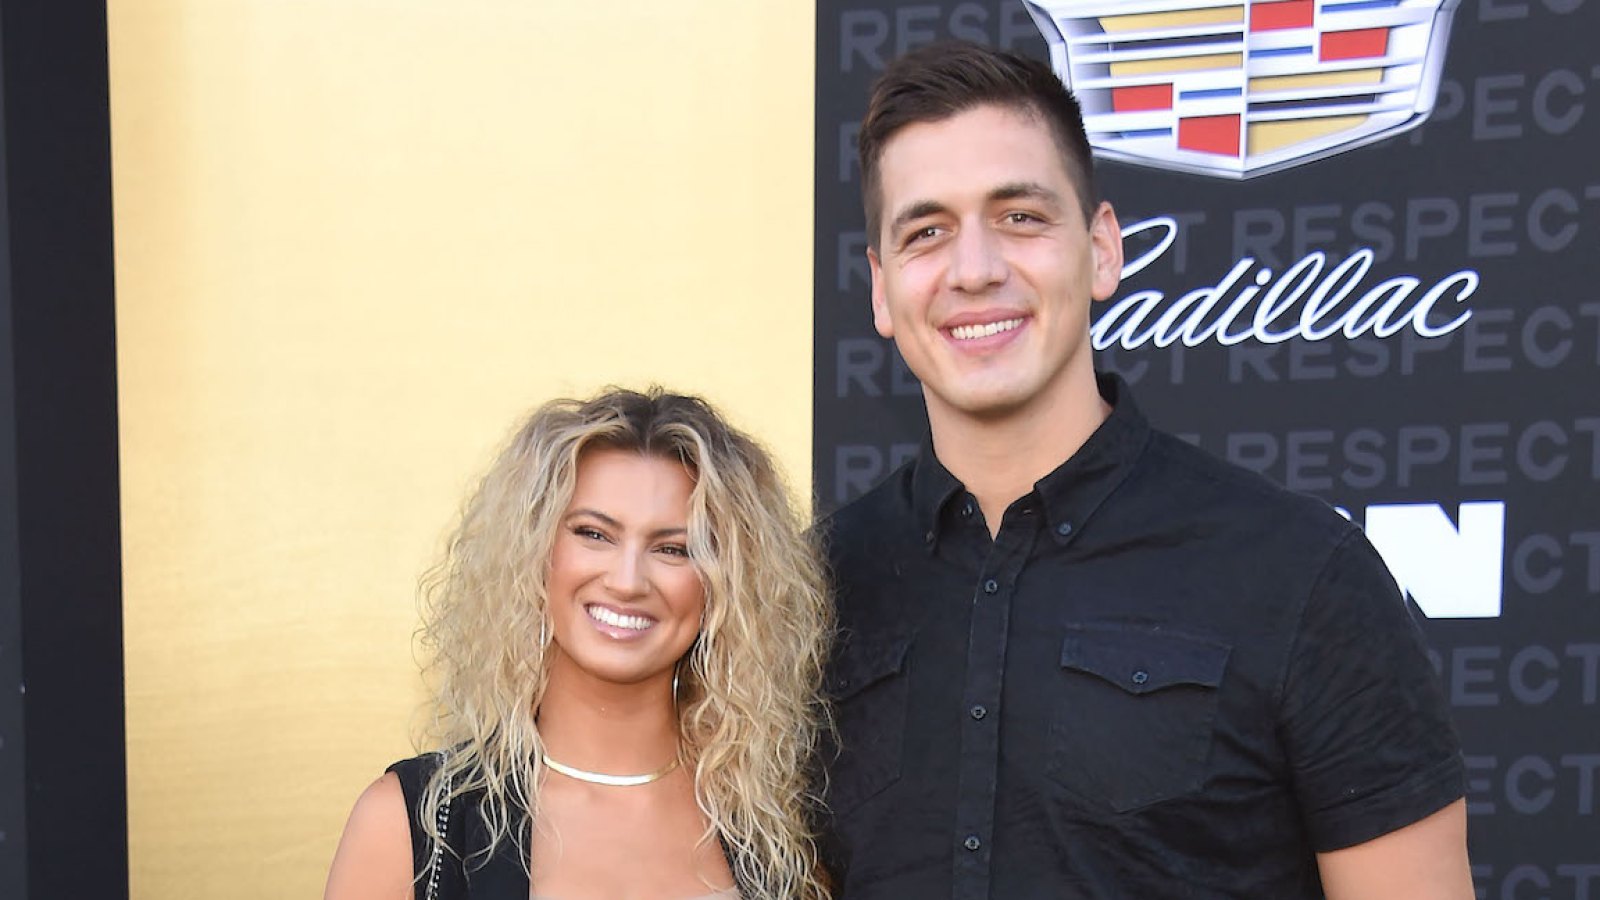 Tori Kelly-s Husband Andre Murillo Shares Update on Her Health Scare